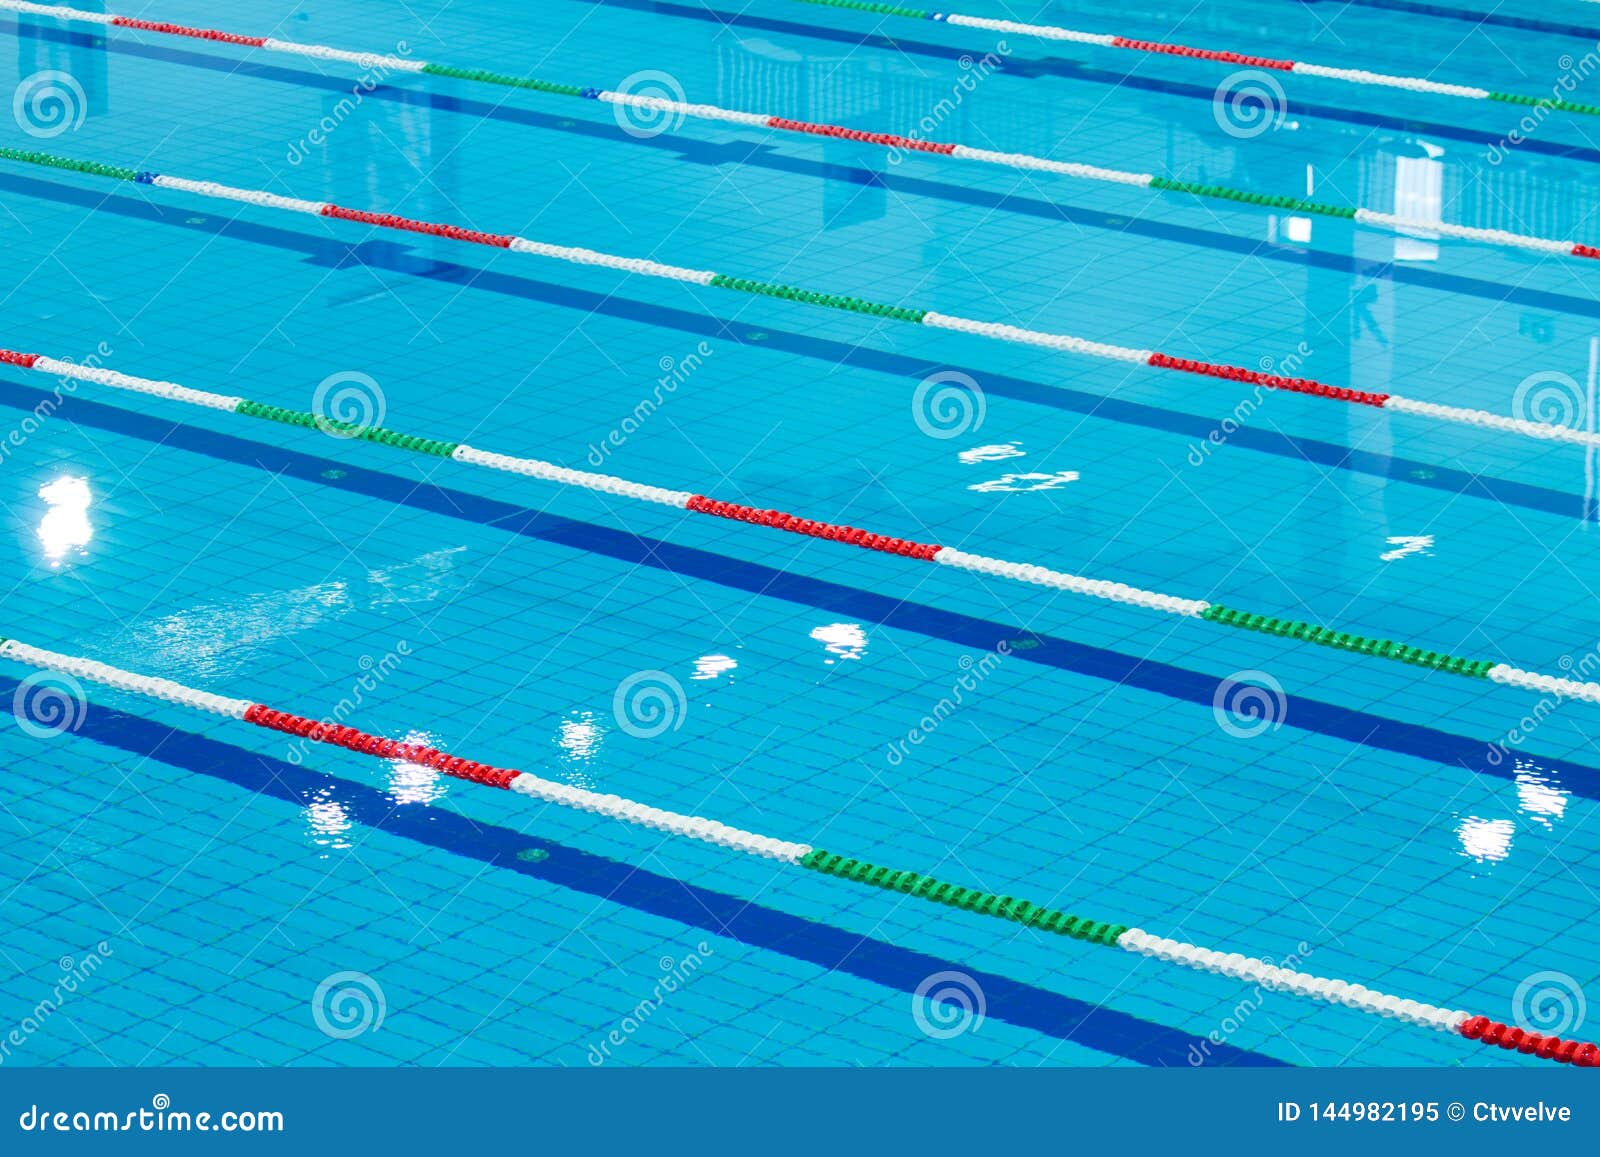 Competition Swimming Pool Stock Image Image Of Leisure 144982195